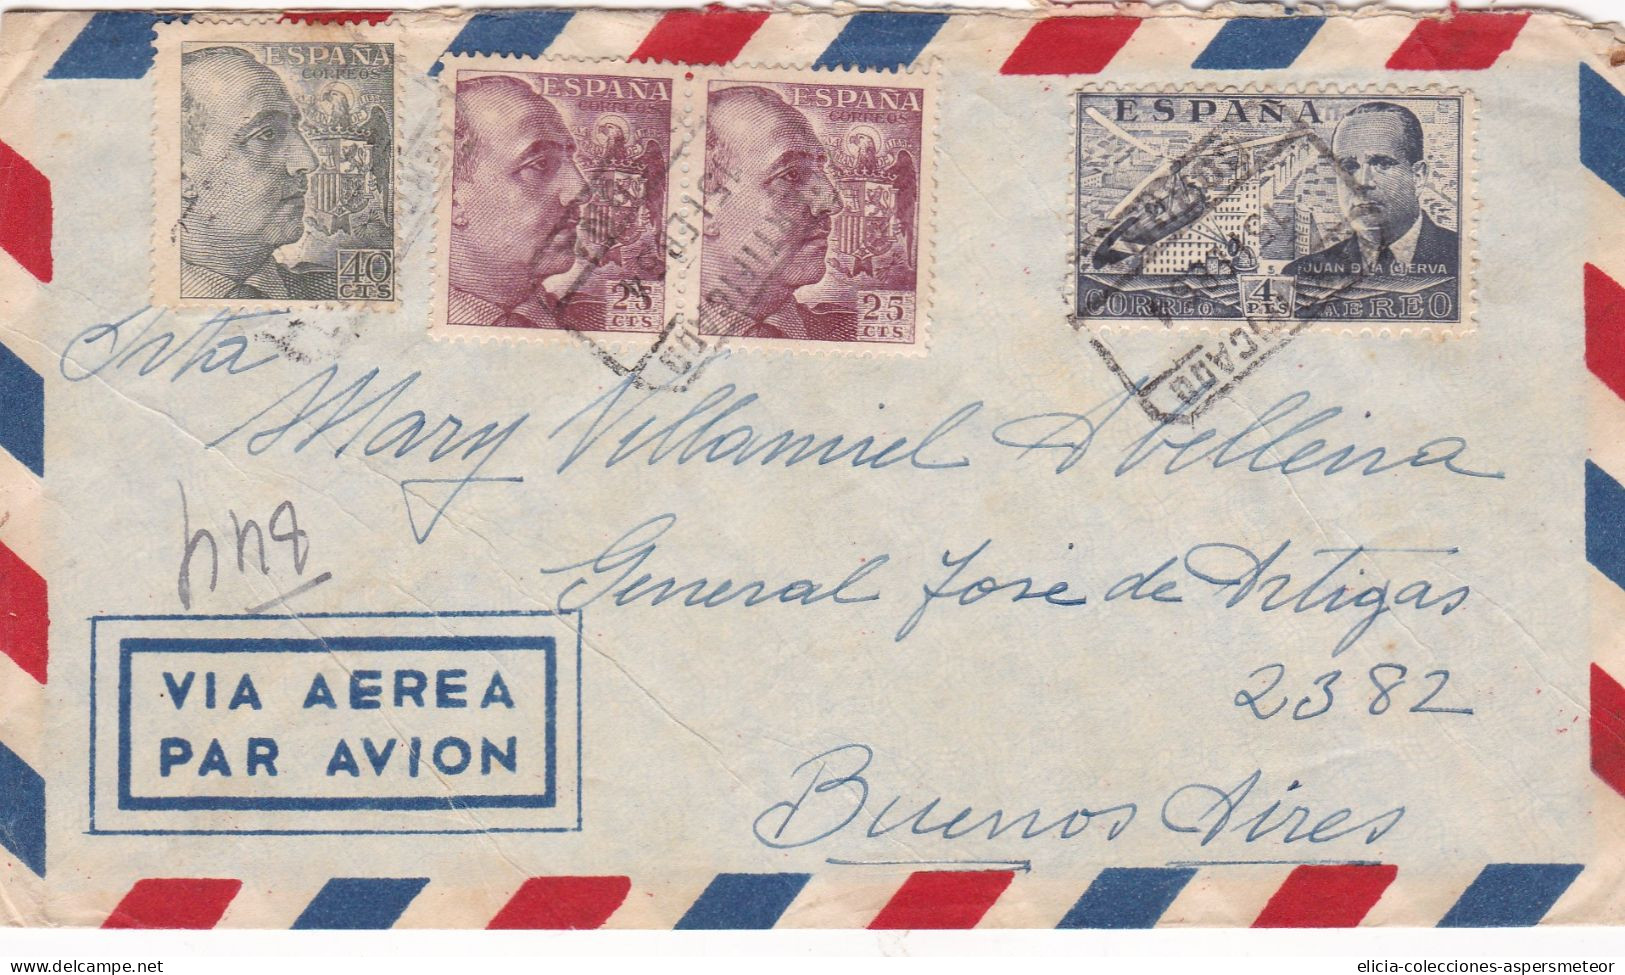 Spain - 1954 - Airmail - Letter - Sent From La Coruña To Buenos Aires, Argentina - Caja 30 - Covers & Documents